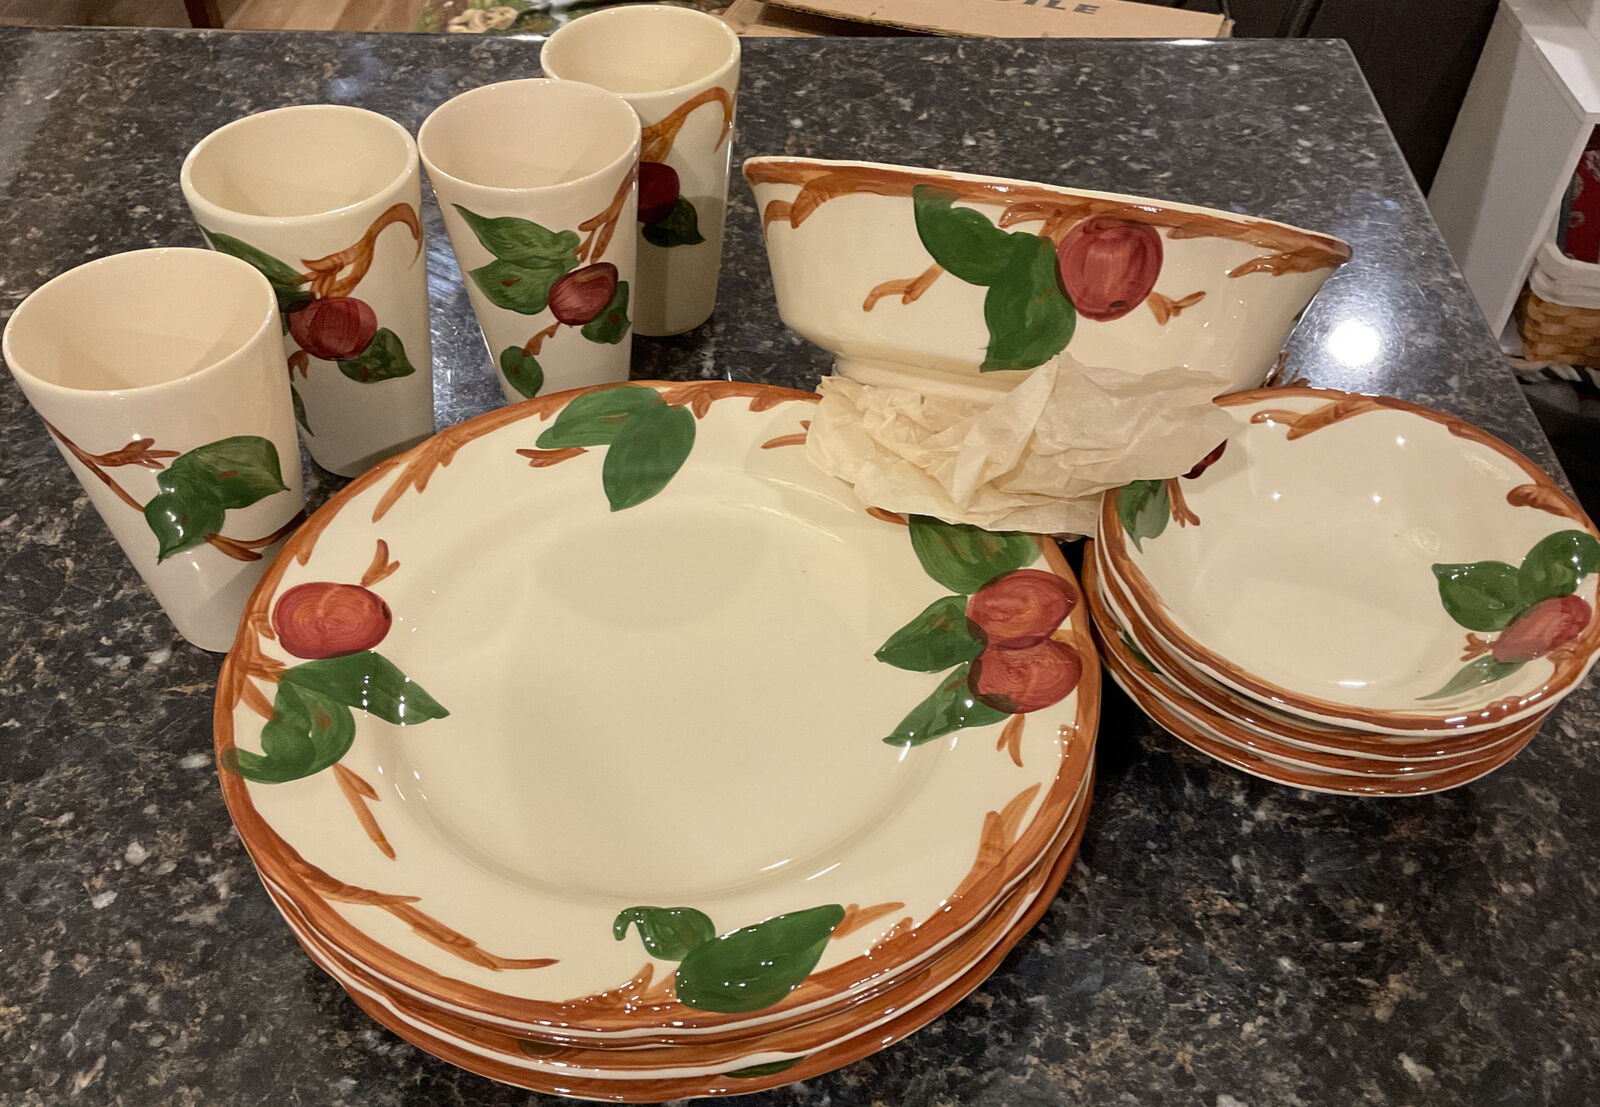 VTG Franciscan APPLES Soup Salad Dinner with Cups 13 PC